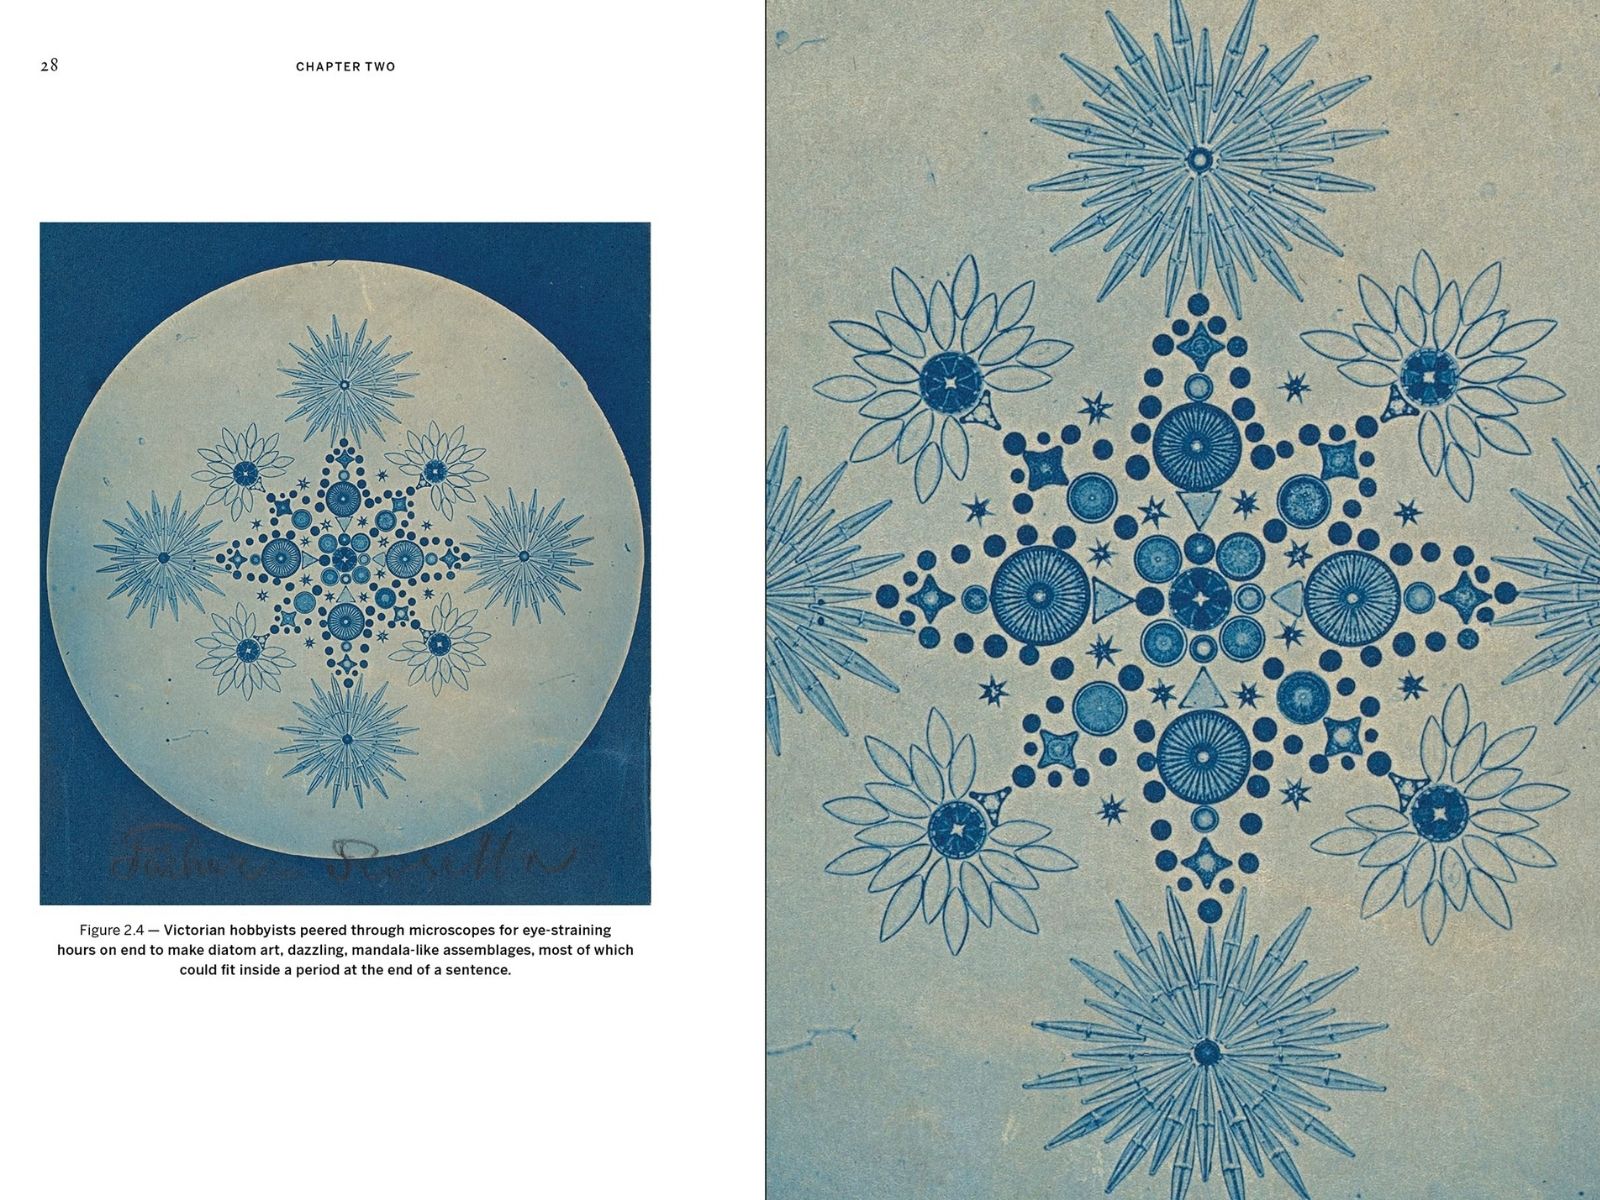 Diatom art - wild design article - Lose Yourself in these Mesmerizing Vintage Illustrations of the Natural World - kimberley ridley on thursd